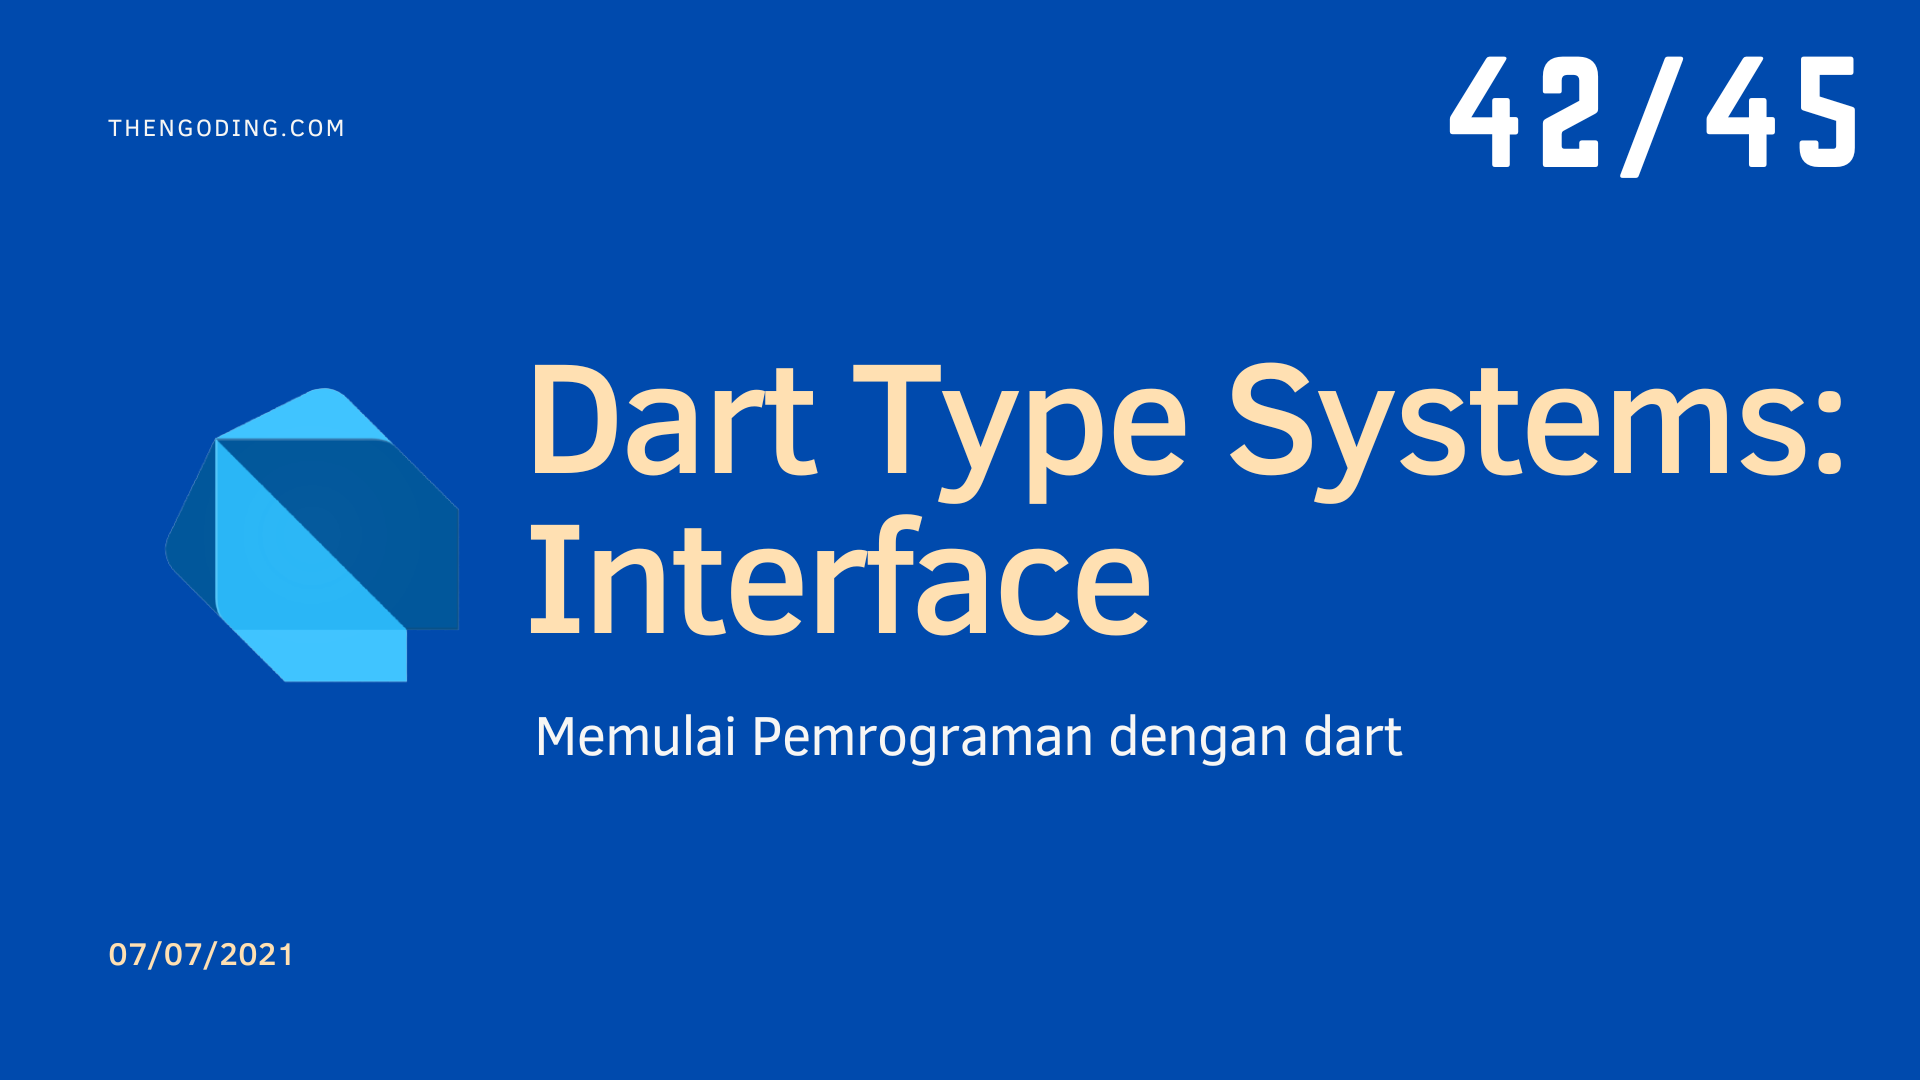 Dart type systems - Interface